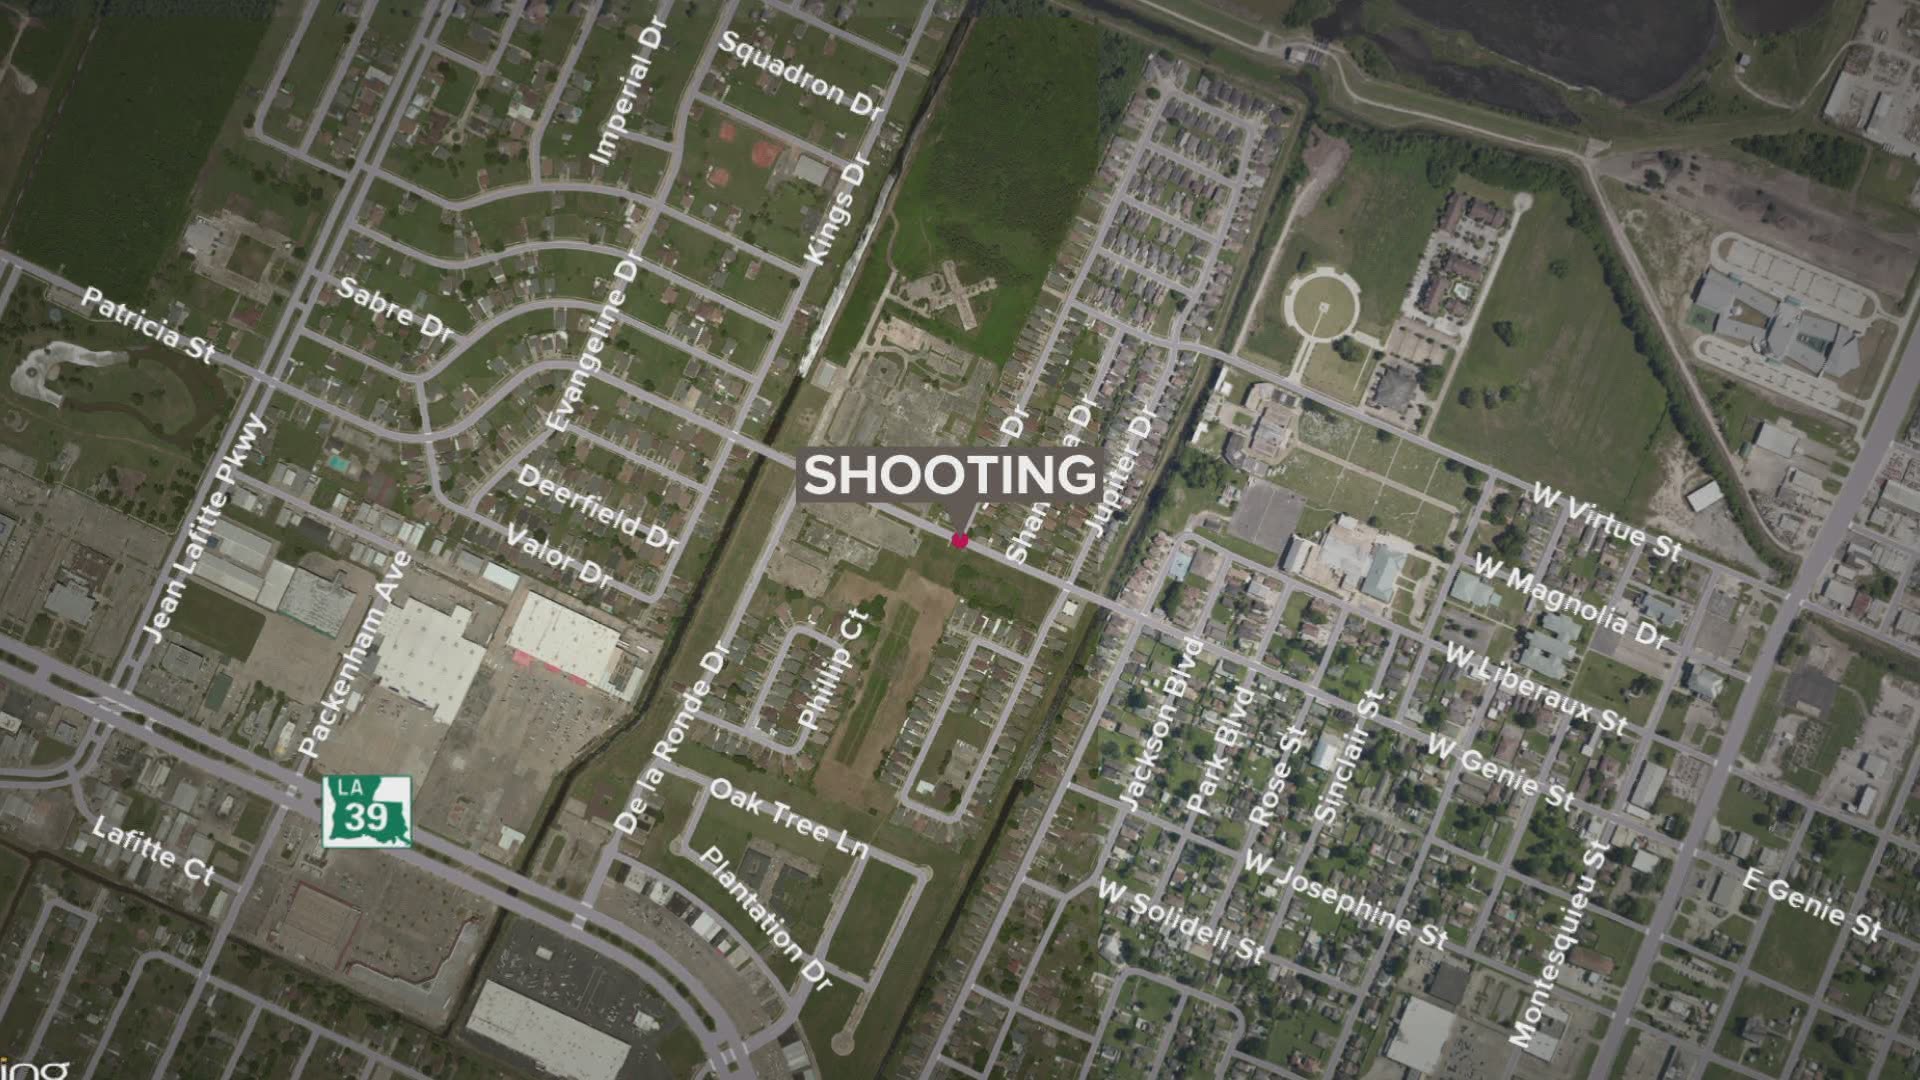 Two teenagers were shot while walking on a street in Chalmette after a car approached them.